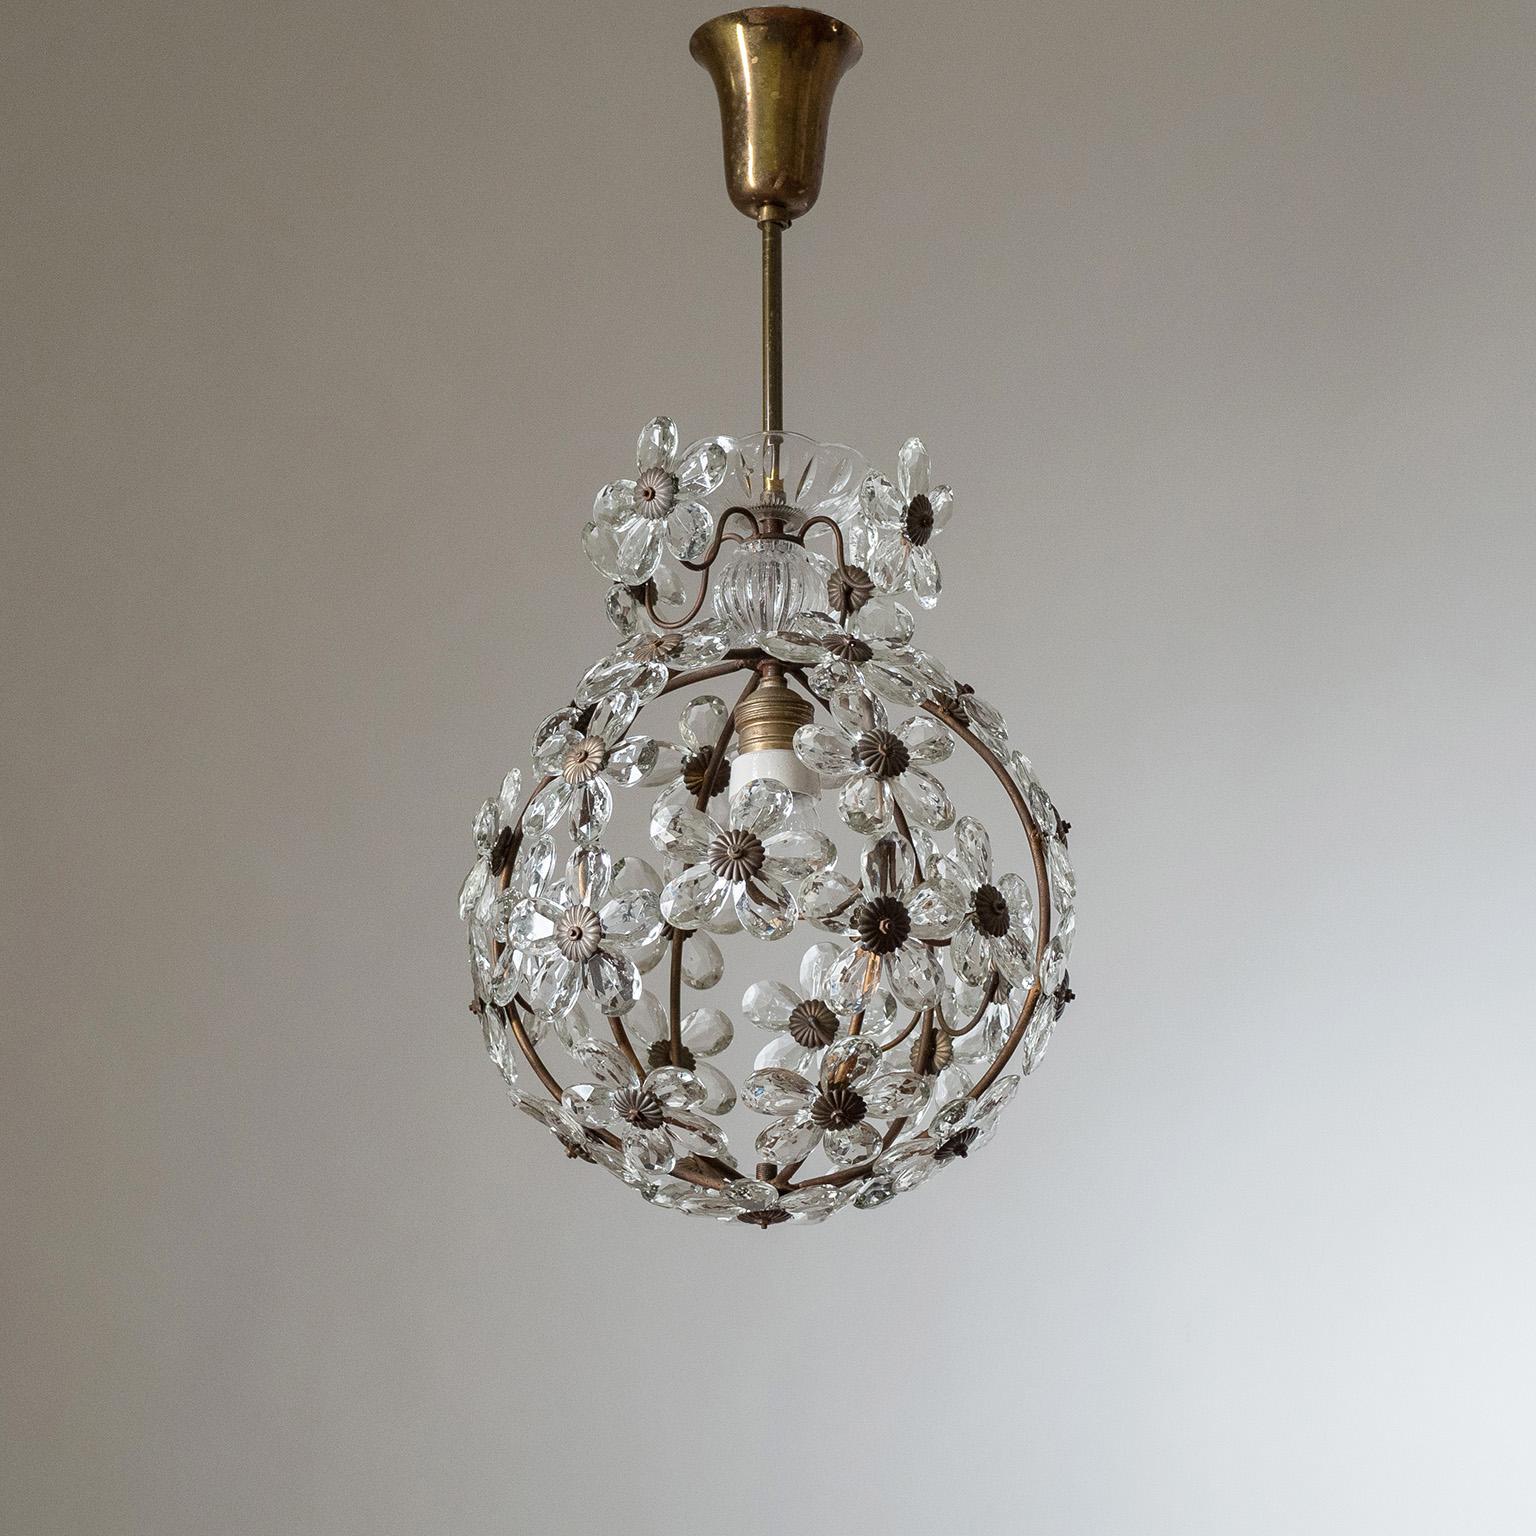 Charming Italian ceiling light from the 1930-1940s. Circular cage-structure adorned with crystals in flower shapes with brass details. One original brass and ceramic E27 socket with new wiring.
Measure: Body Height 36cm (14?).